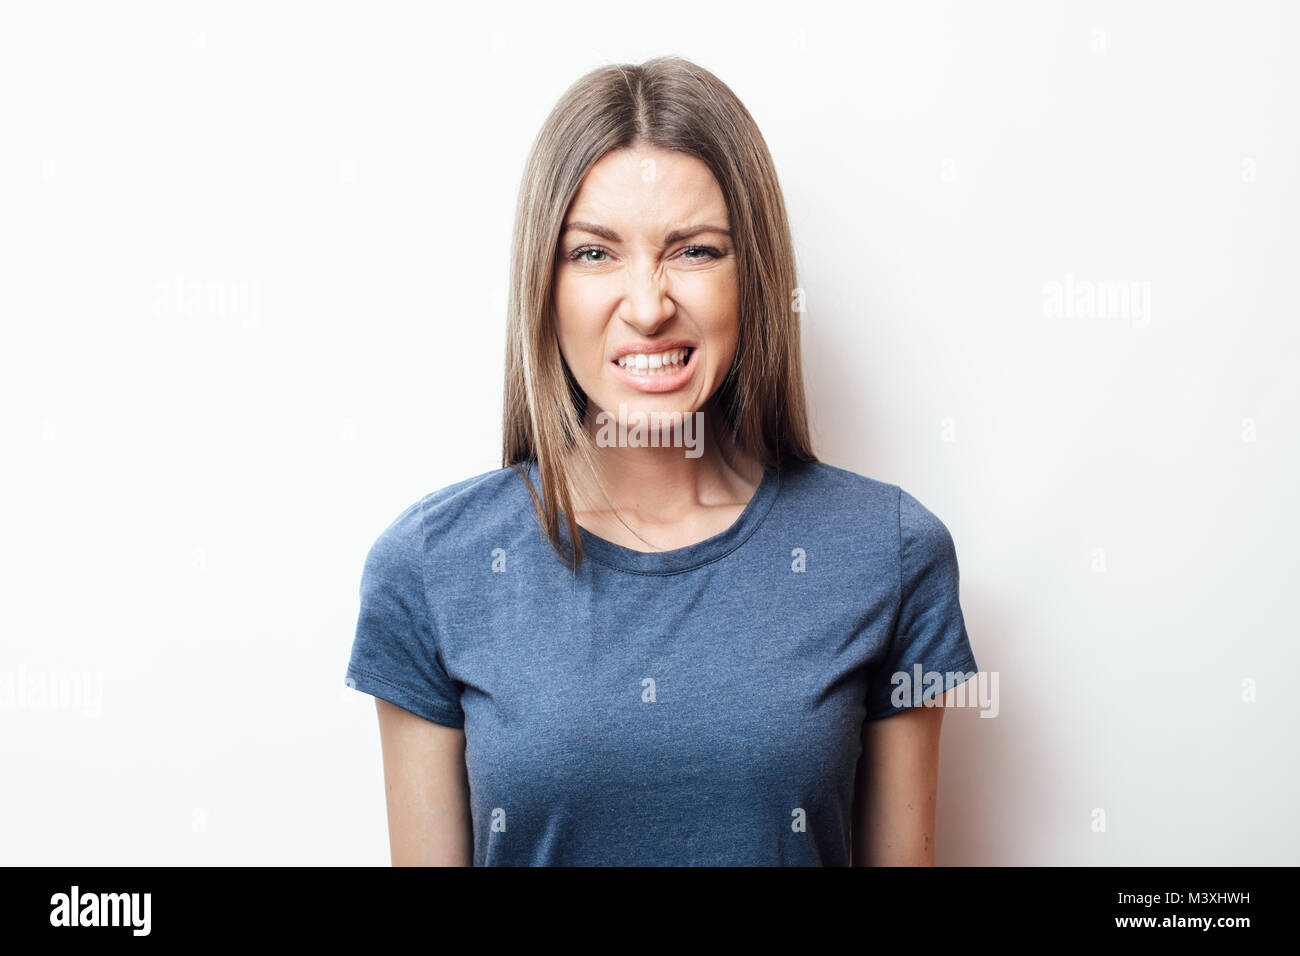 The dissatisfied girl. Anxiety. Disease. Sadness. Disorder Stock Photo